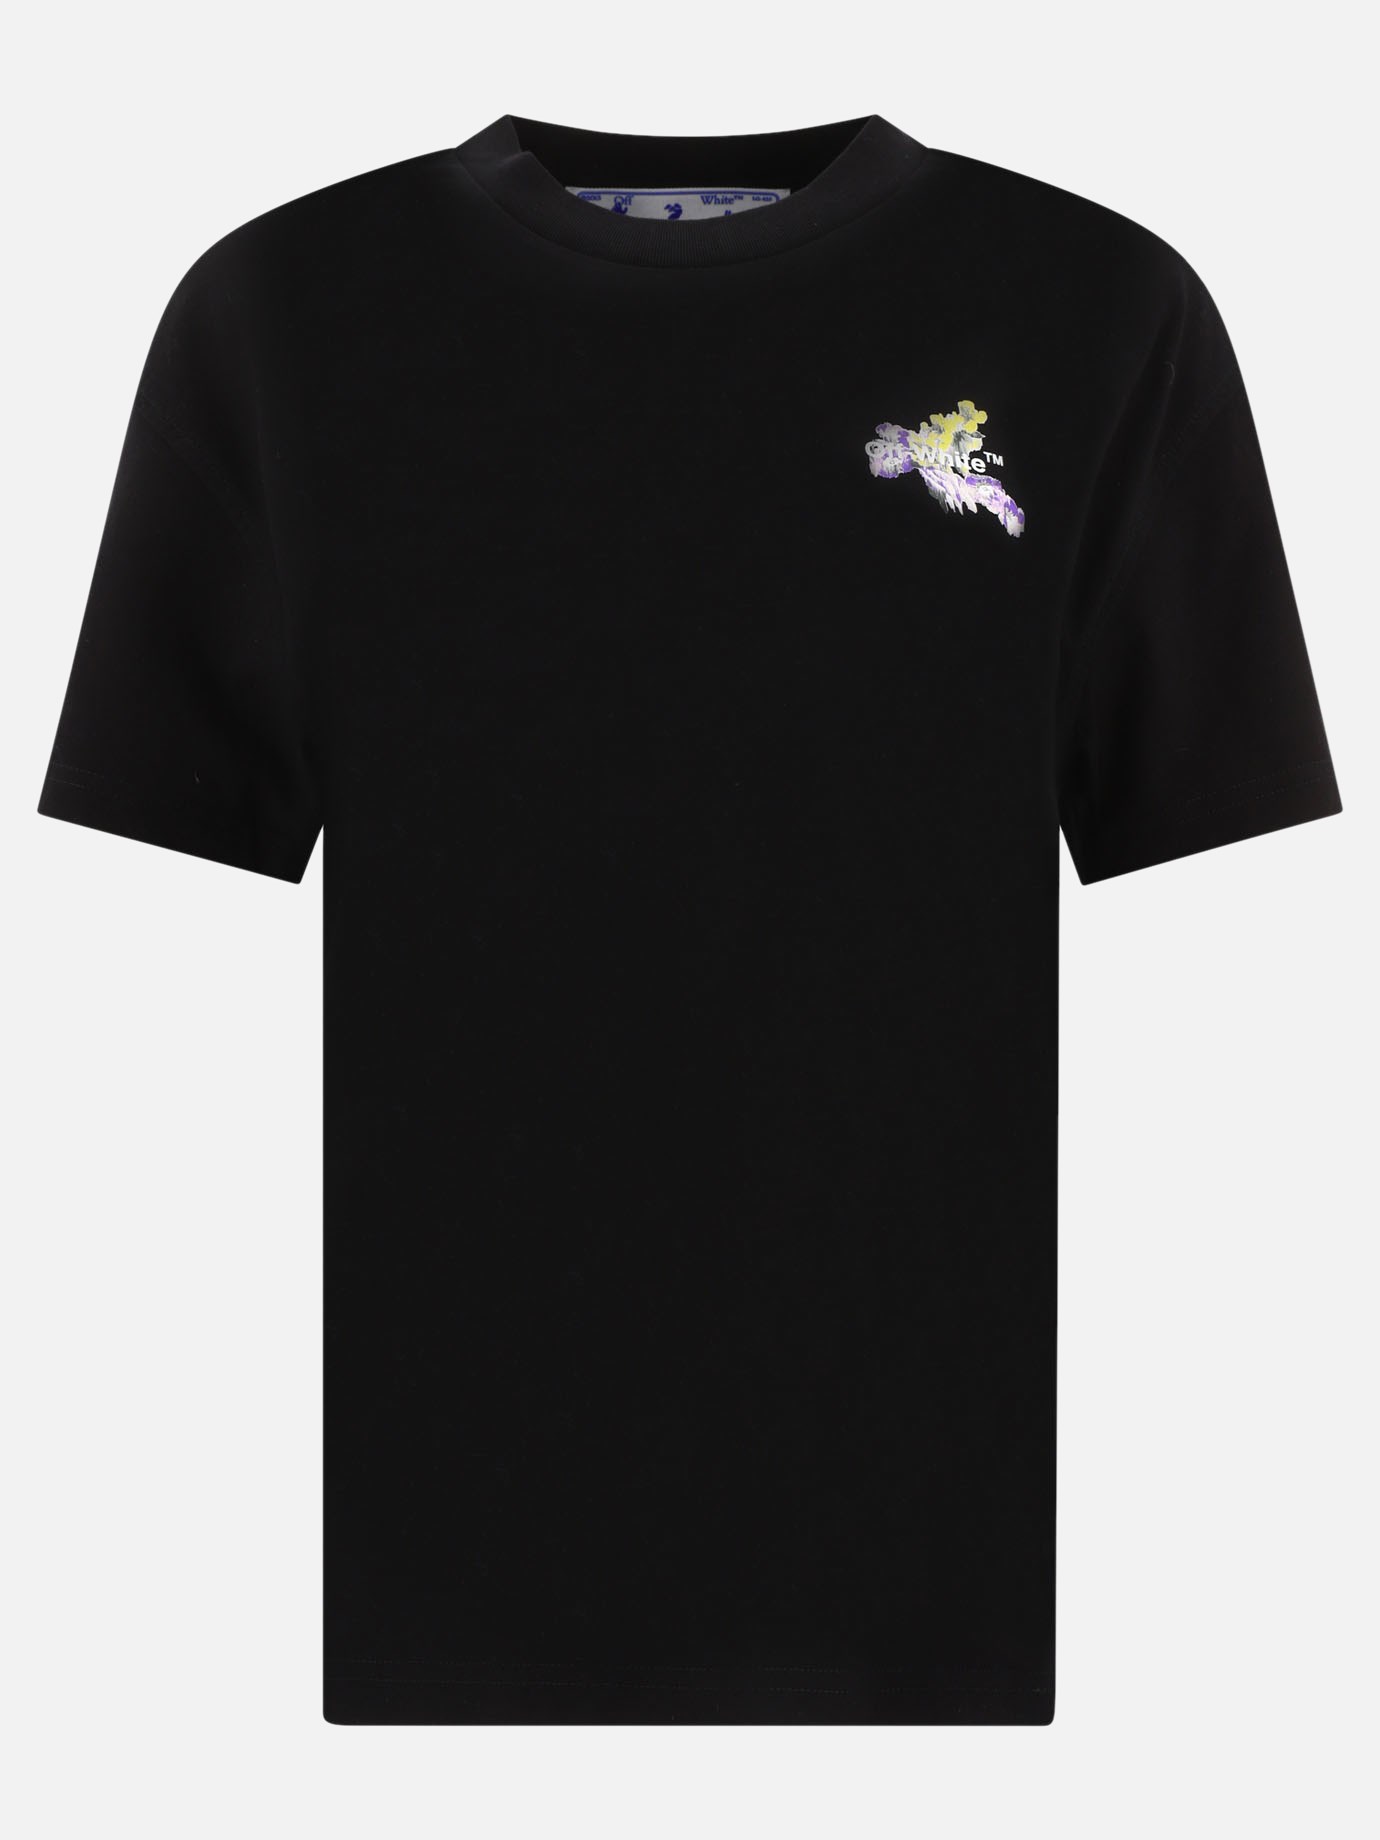  Flowers Arrow  t-shirtby Off-White - 3